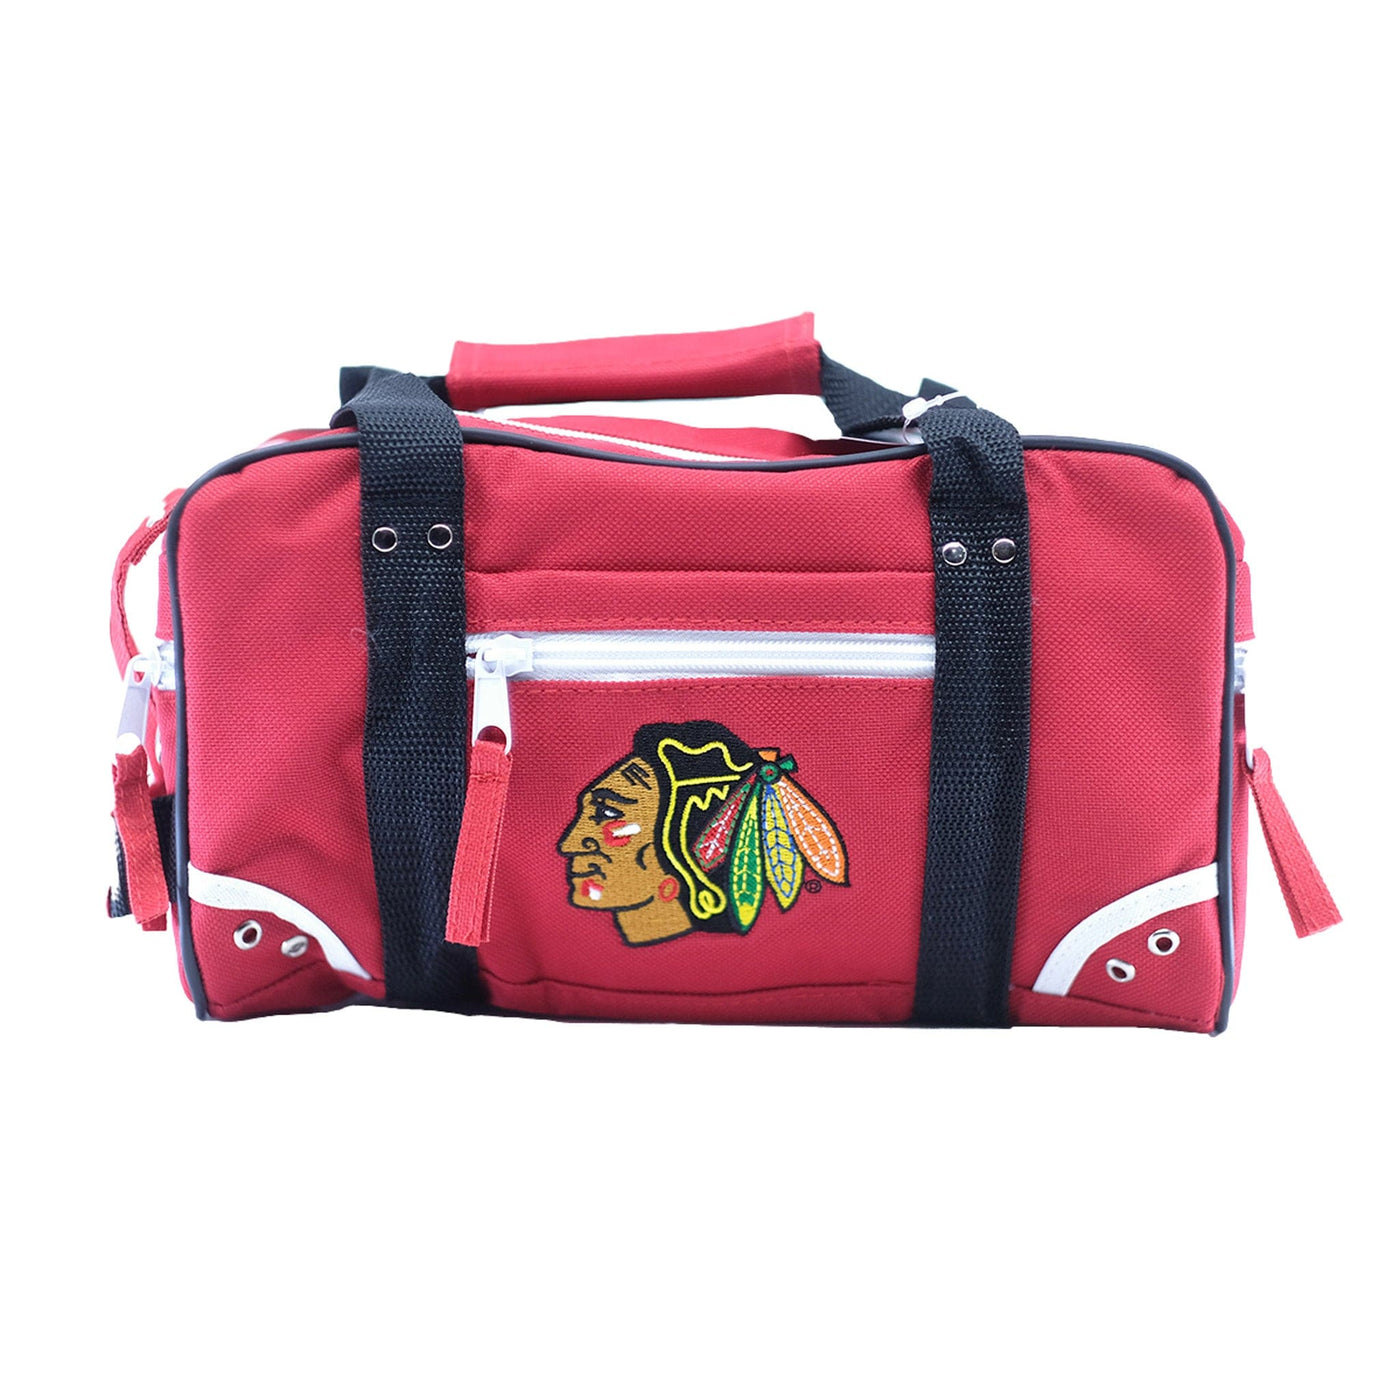 Chicago Blackhawks Ultimate Sports Kit NHL Toiletry Bag - The Hockey Shop Source For Sports